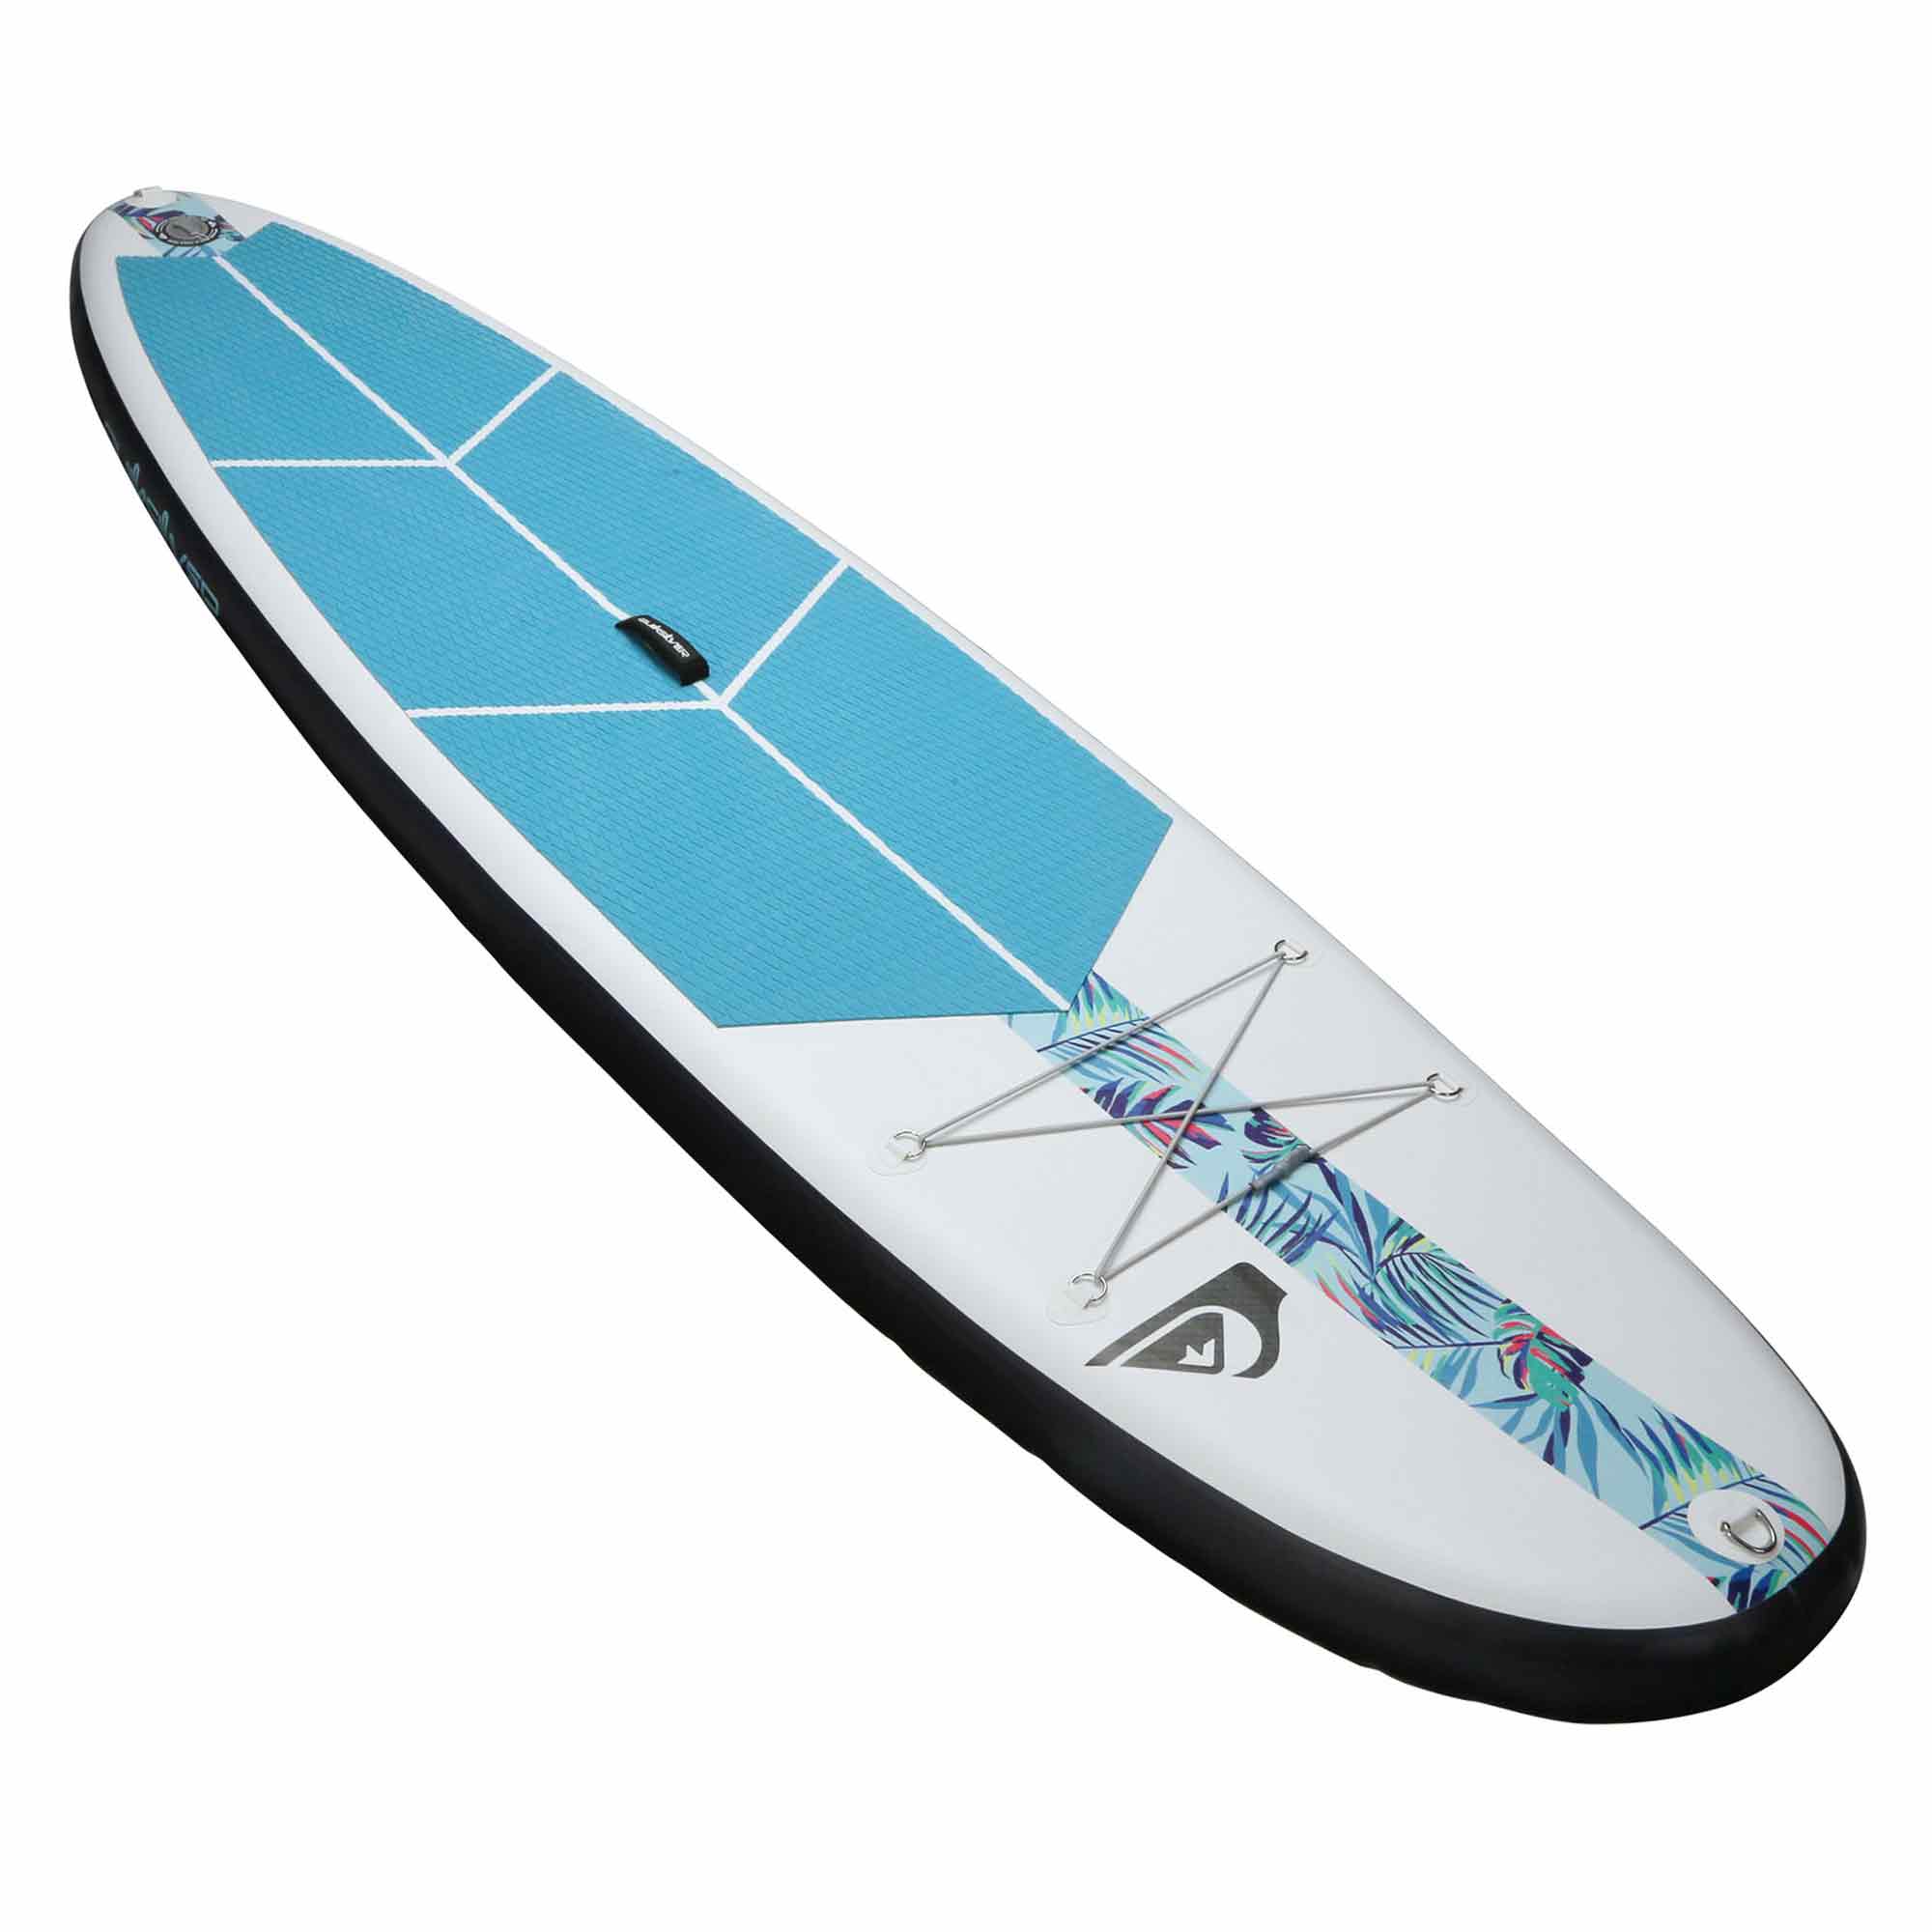 Quiksilver Thor iSUP Inflatable Stand Up Paddle Board 10ft6in